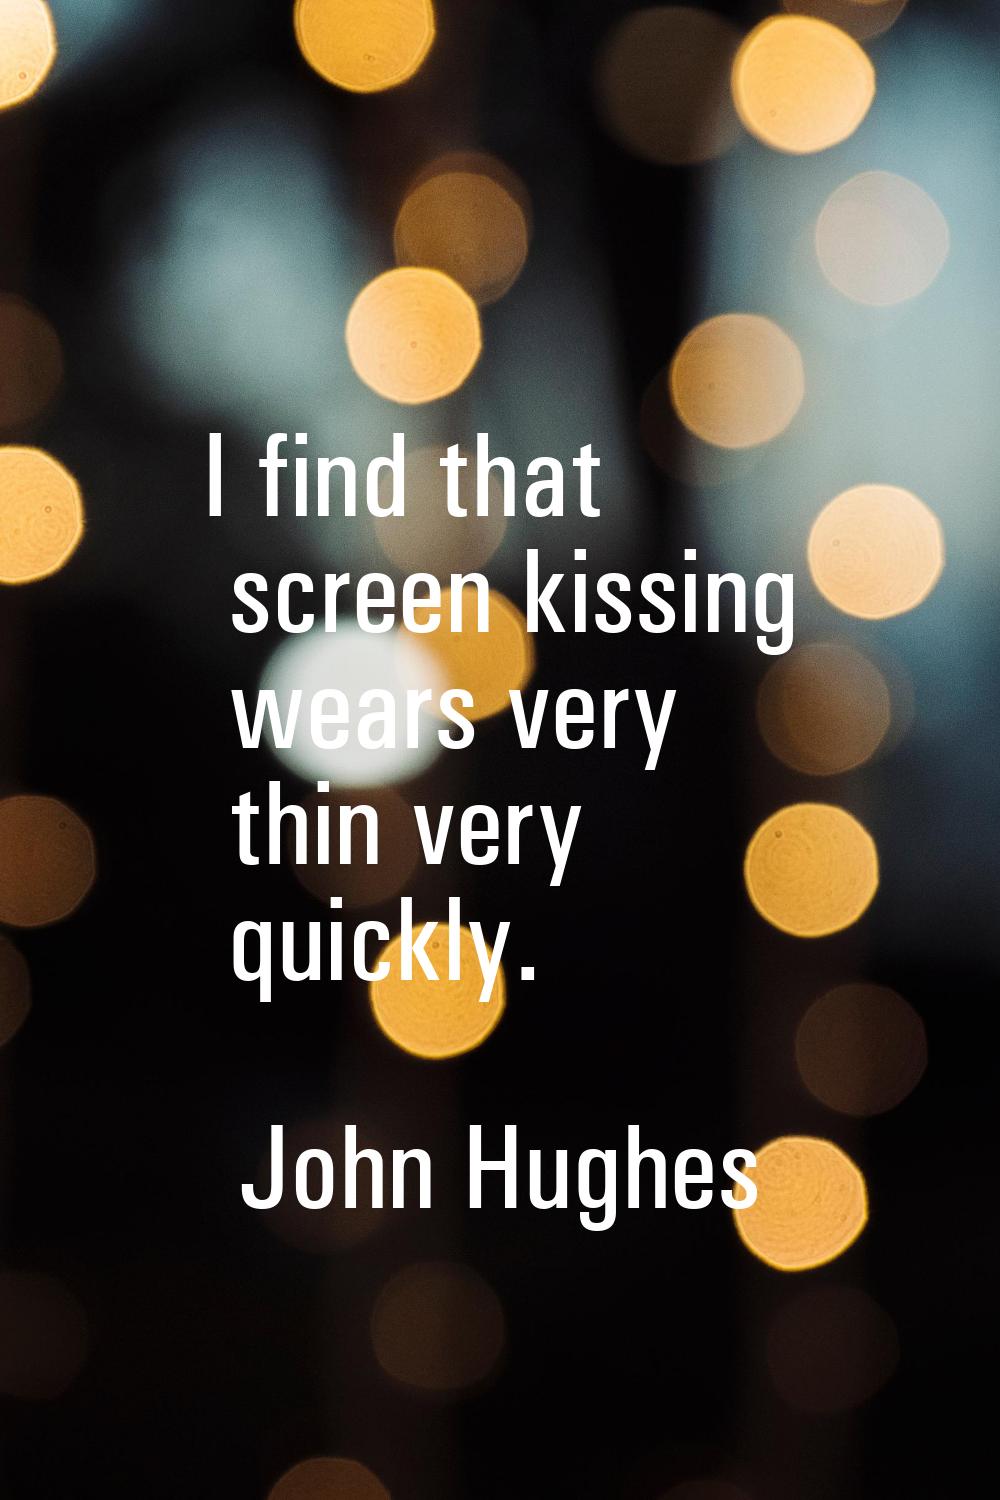 I find that screen kissing wears very thin very quickly.